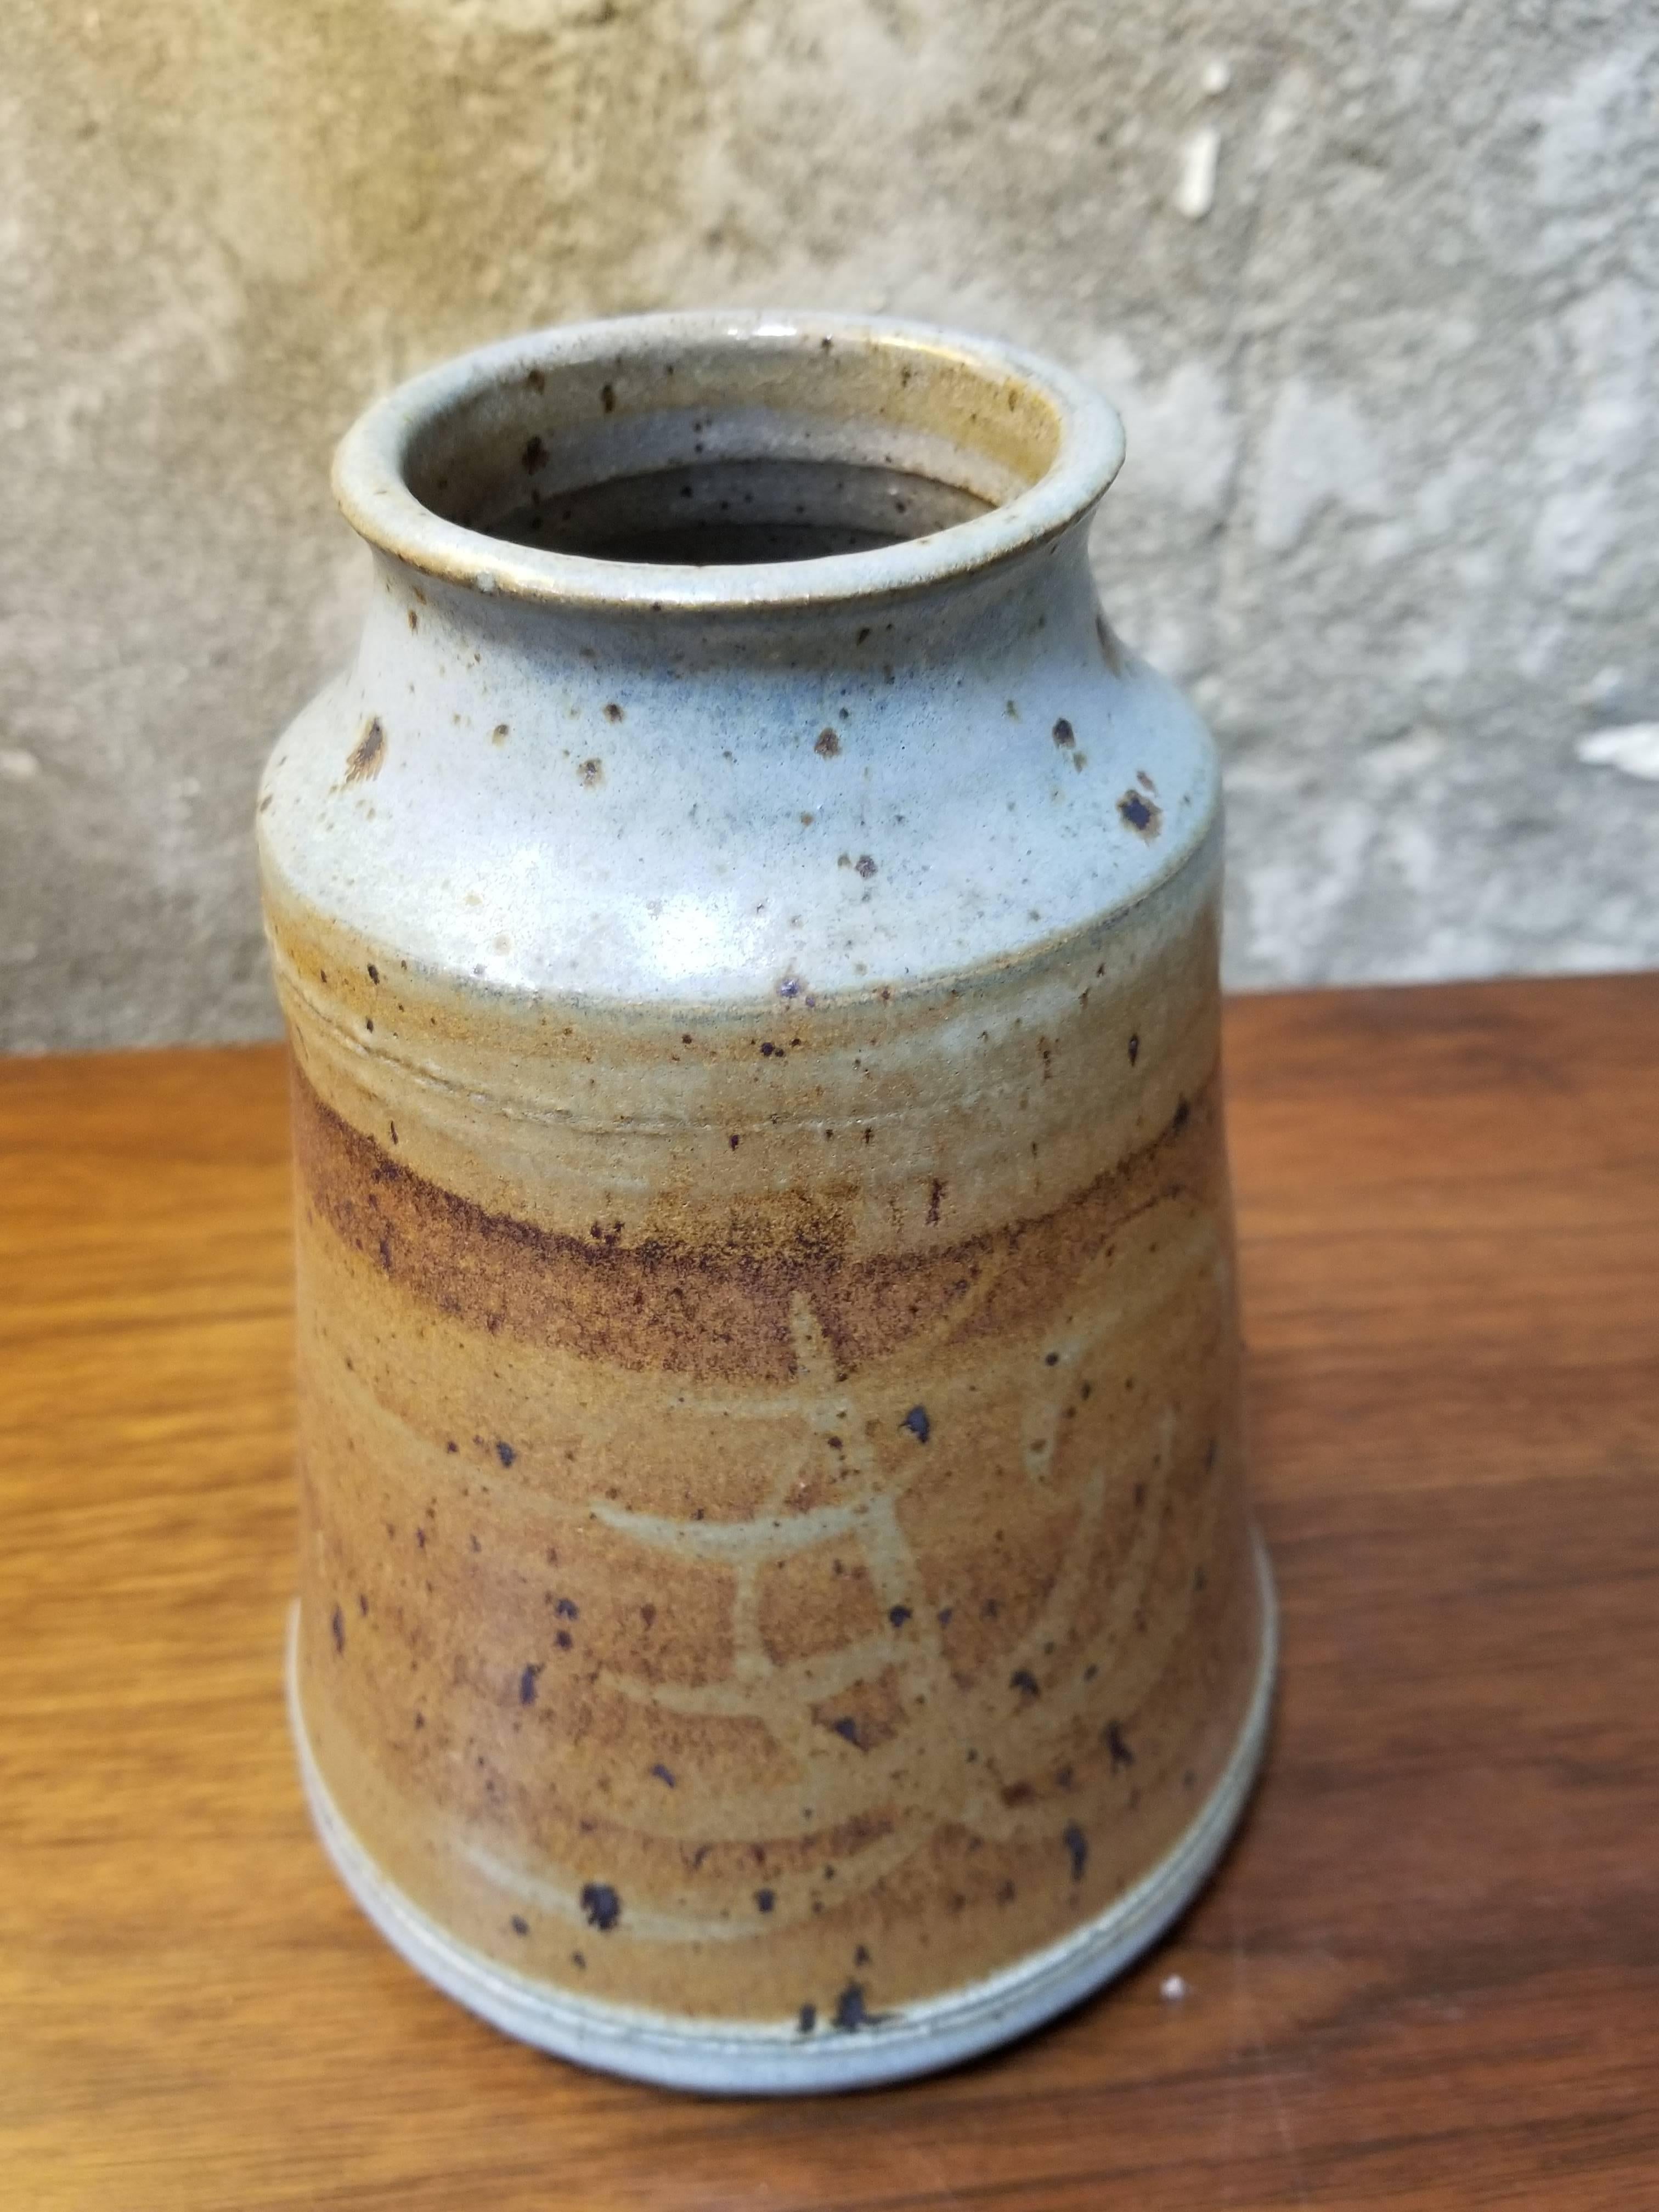 American Studio Pottery Vessel by Herman Volz For Sale